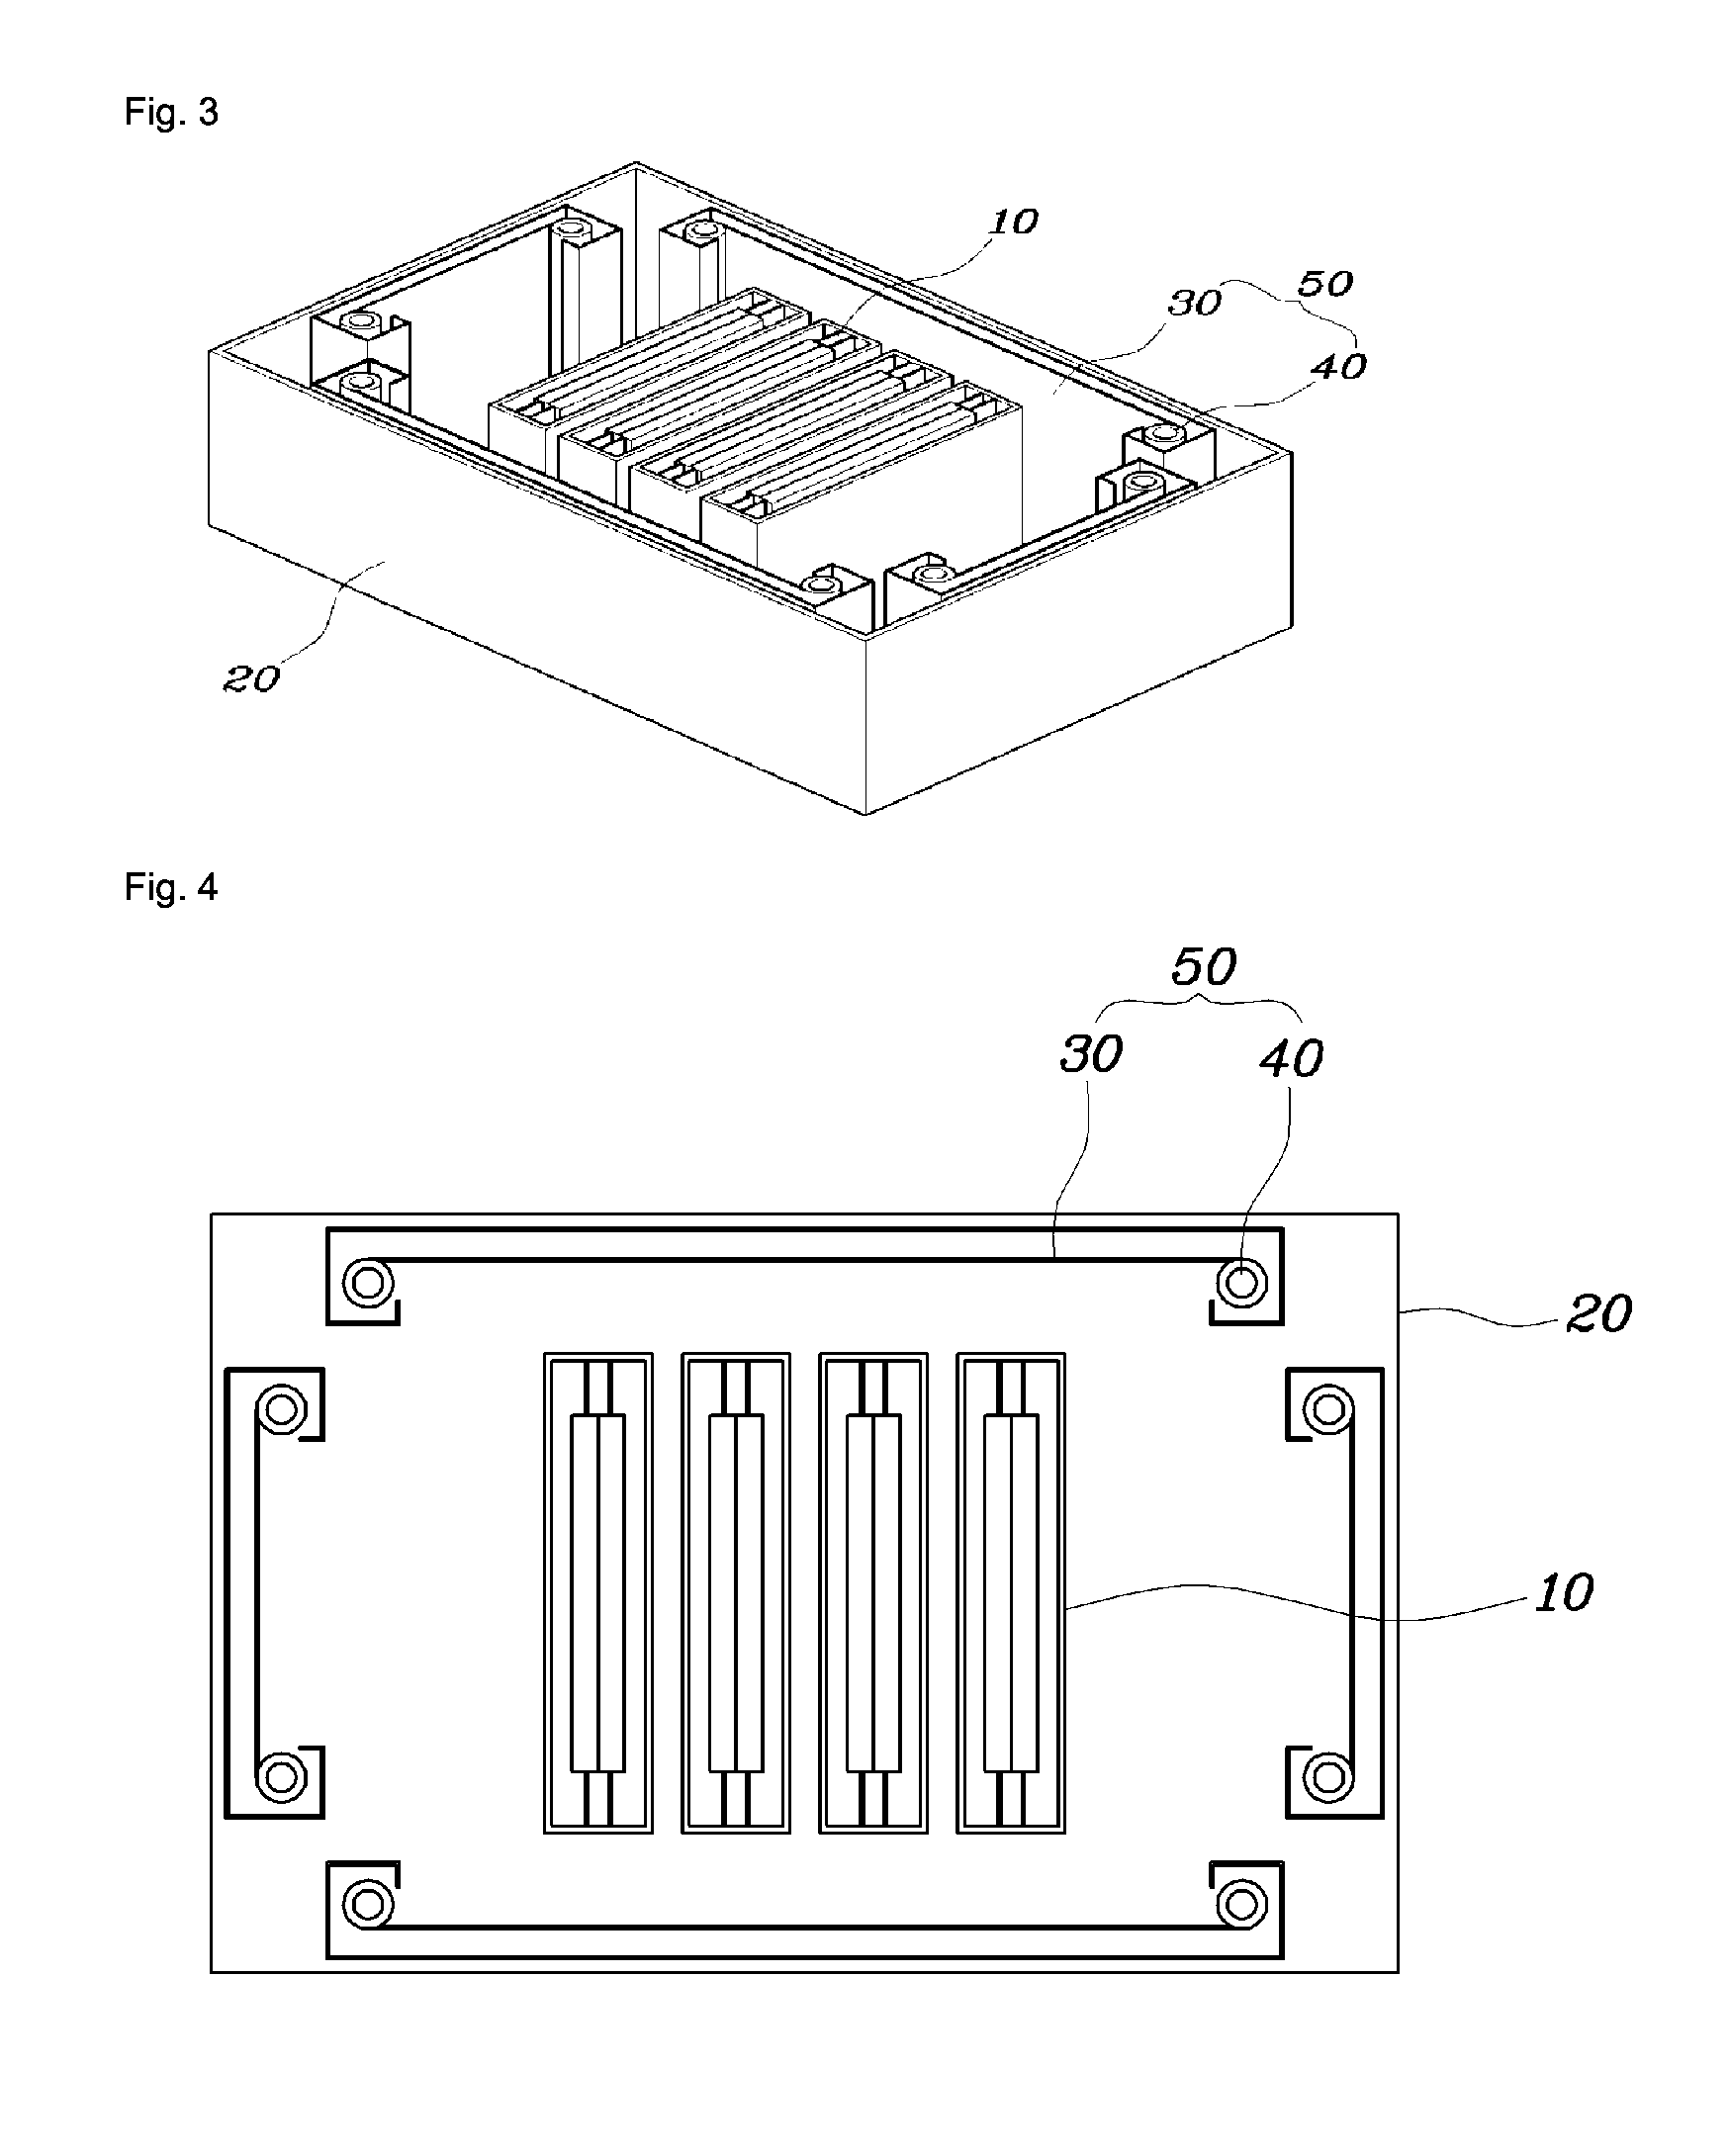 Apparatus for protecting battery pack